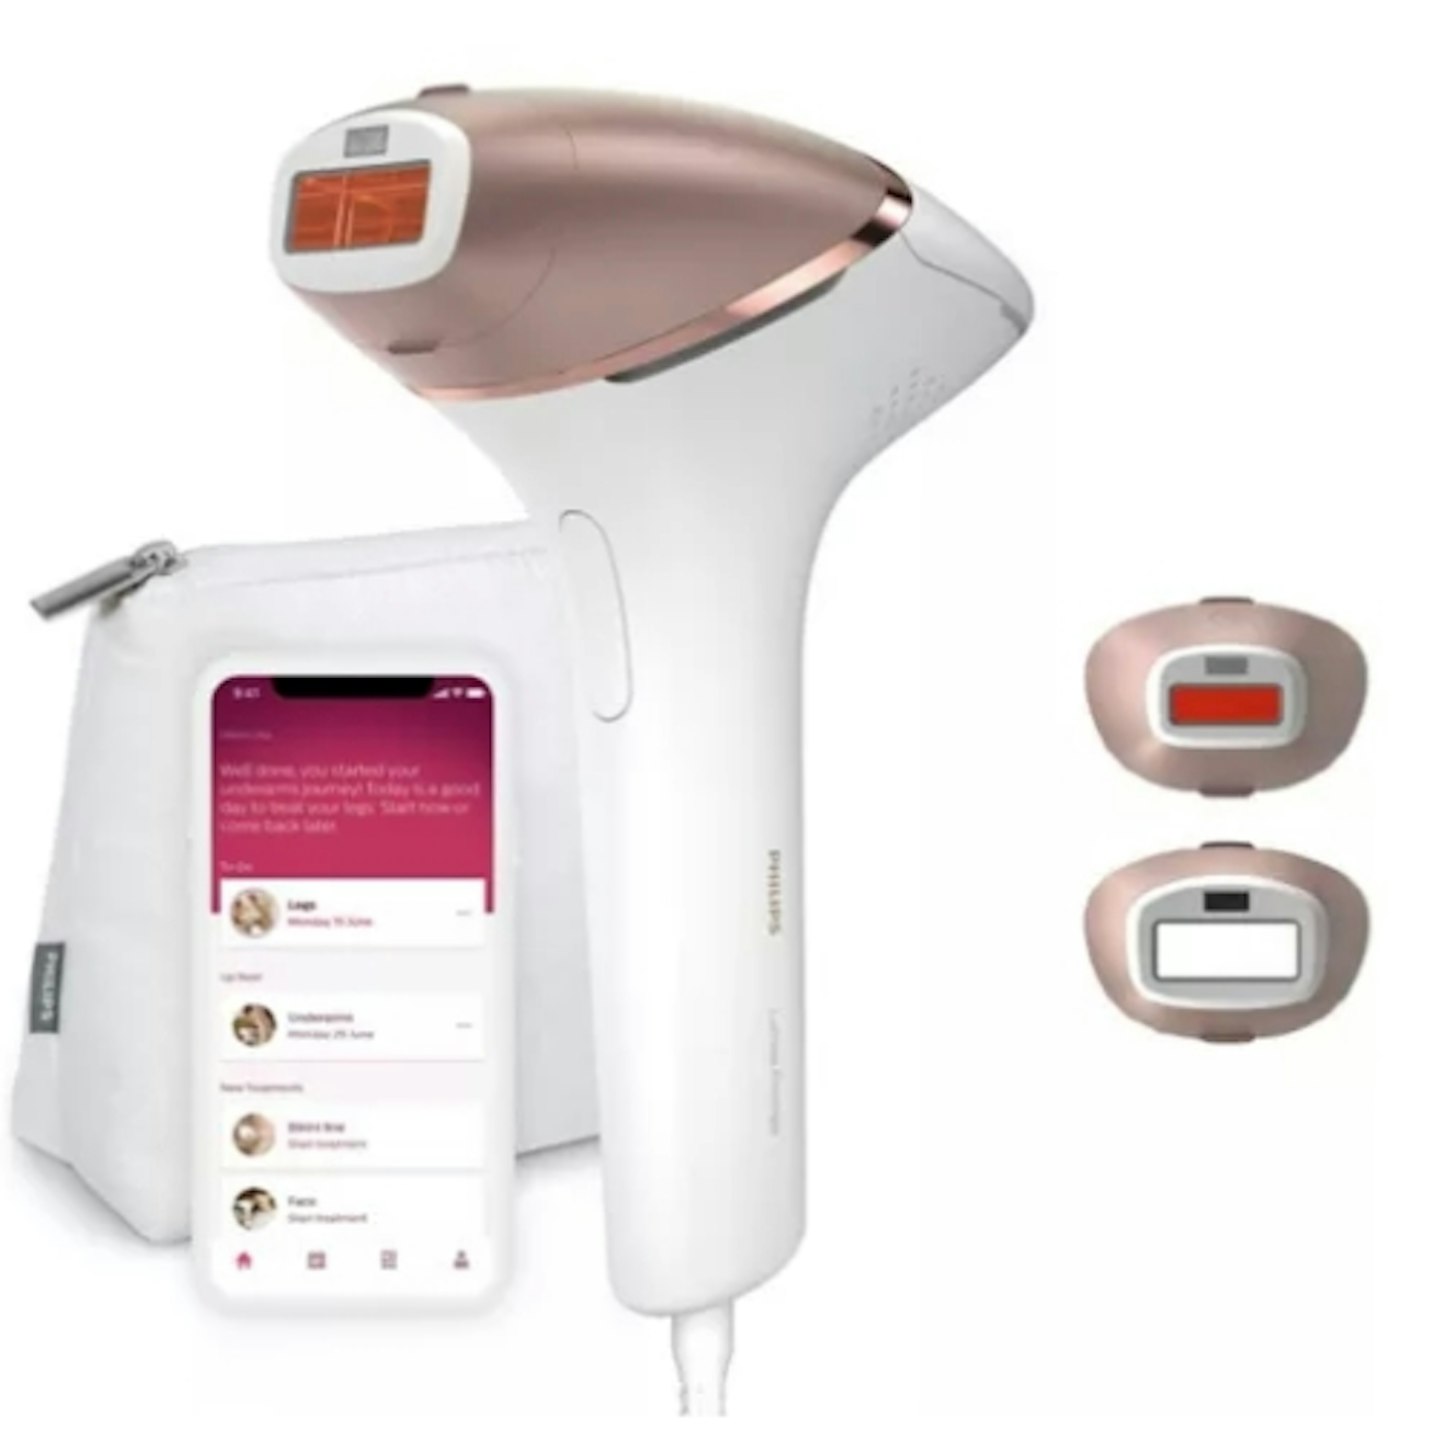 Philips Lumea IPL 8000 Series, Corded with 2 Attachments for Body and Face – BRI945/00